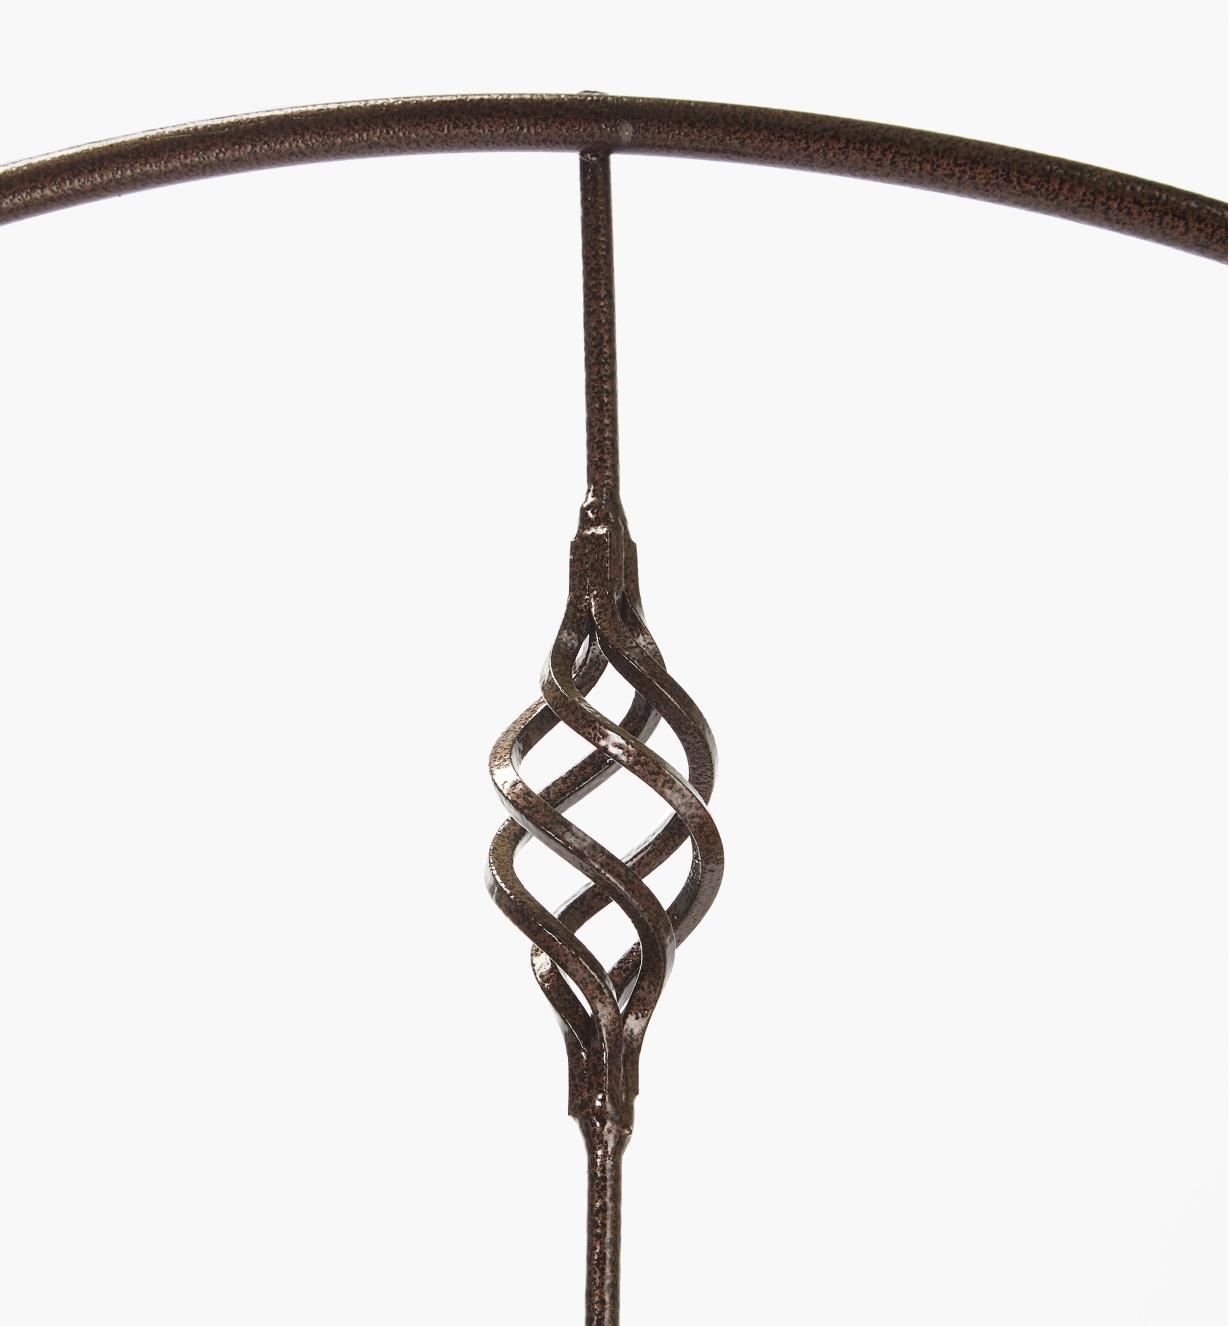 Closer view of decorative twist on the Venetian garden trellis with hammered copper finish